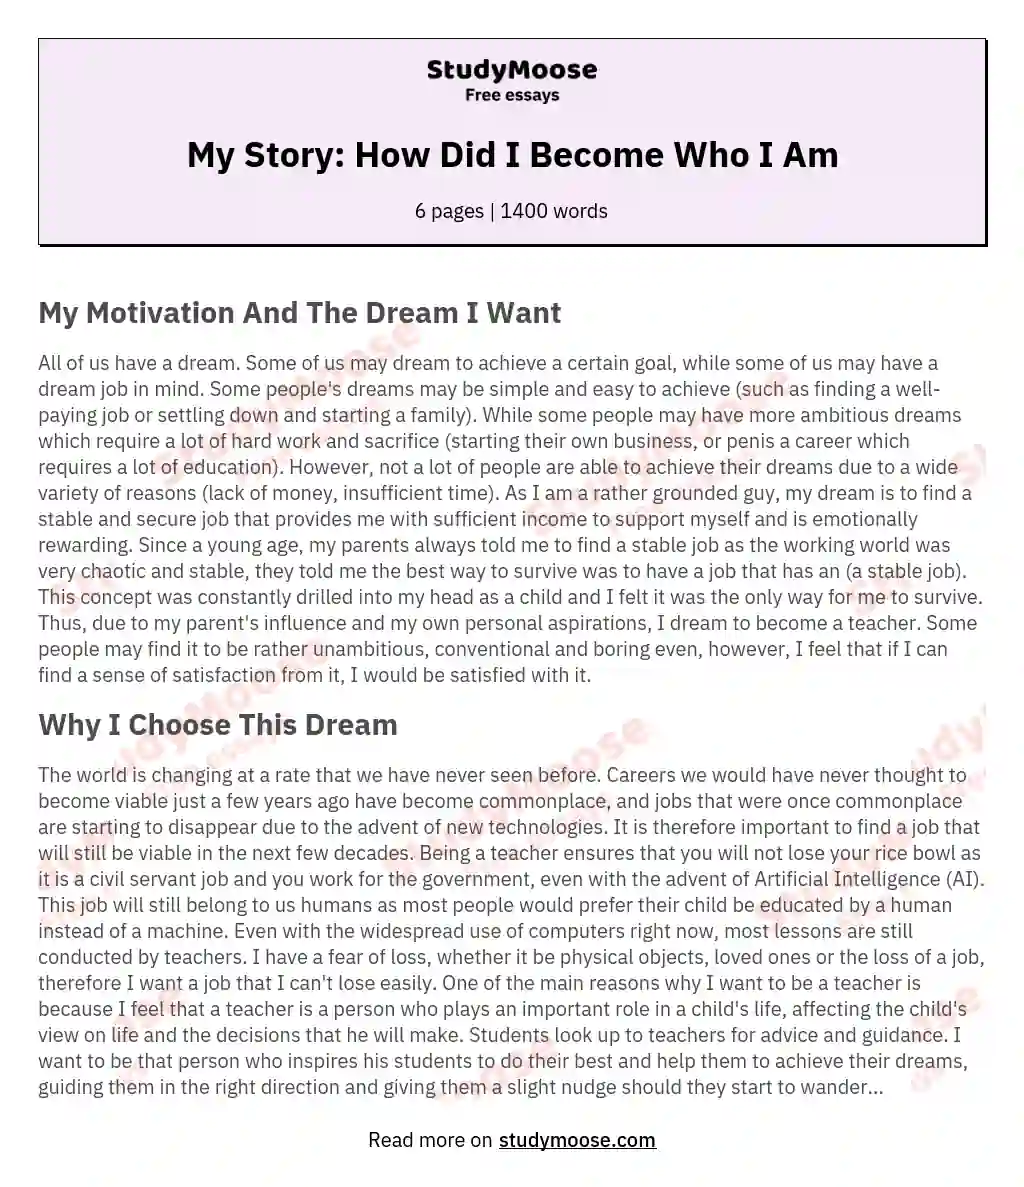 My Story: How Did I Become Who I Am essay